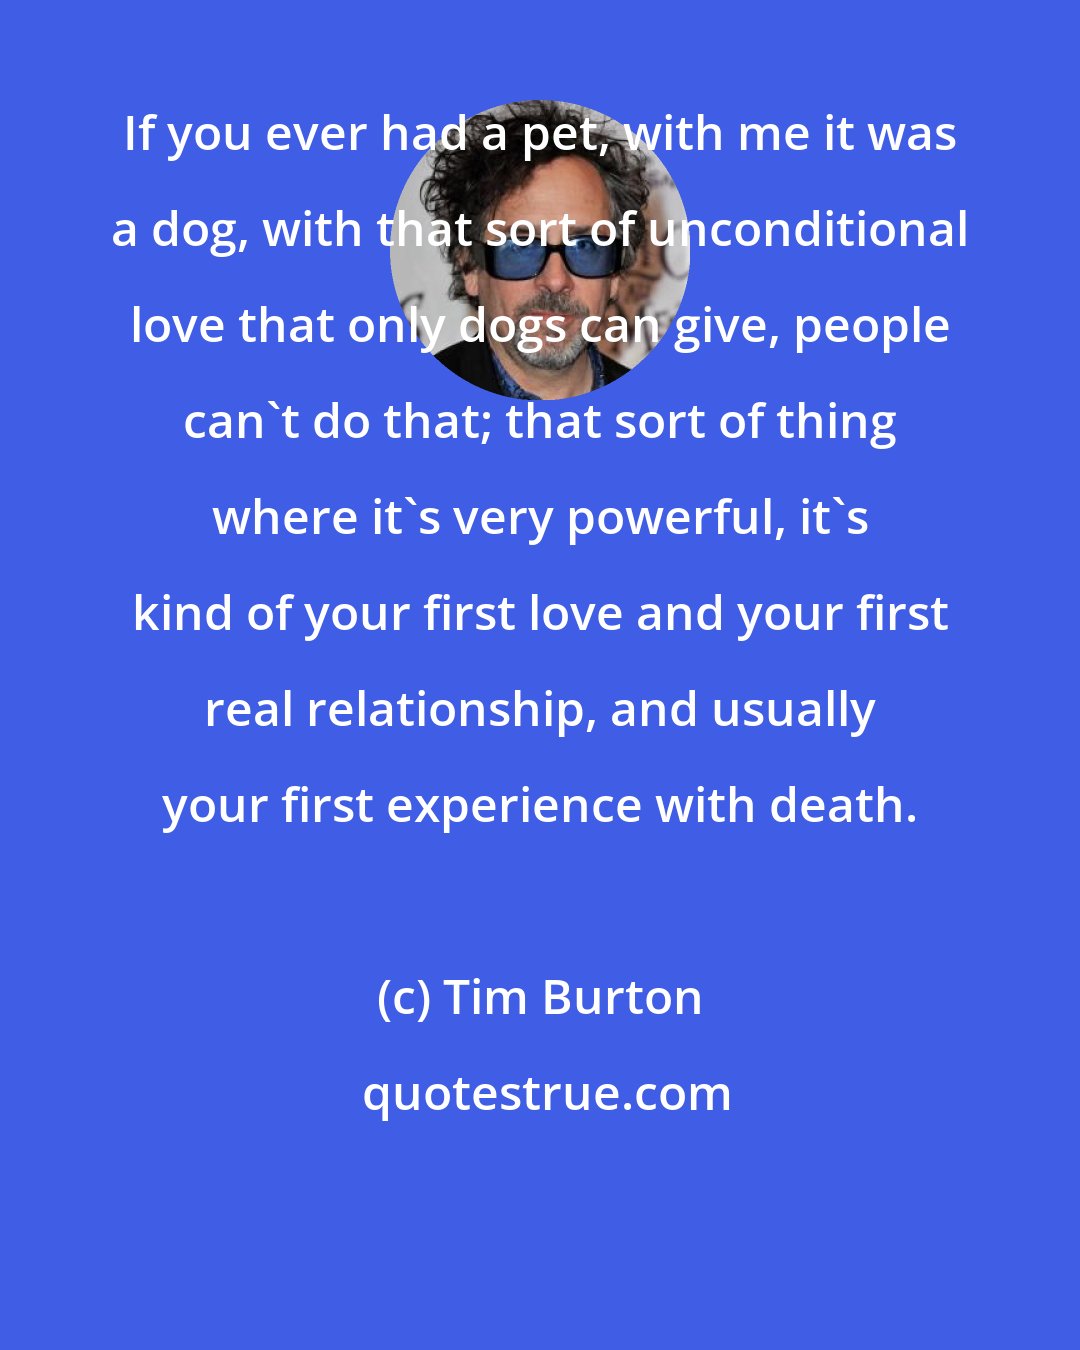 Tim Burton: If you ever had a pet, with me it was a dog, with that sort of unconditional love that only dogs can give, people can't do that; that sort of thing where it's very powerful, it's kind of your first love and your first real relationship, and usually your first experience with death.